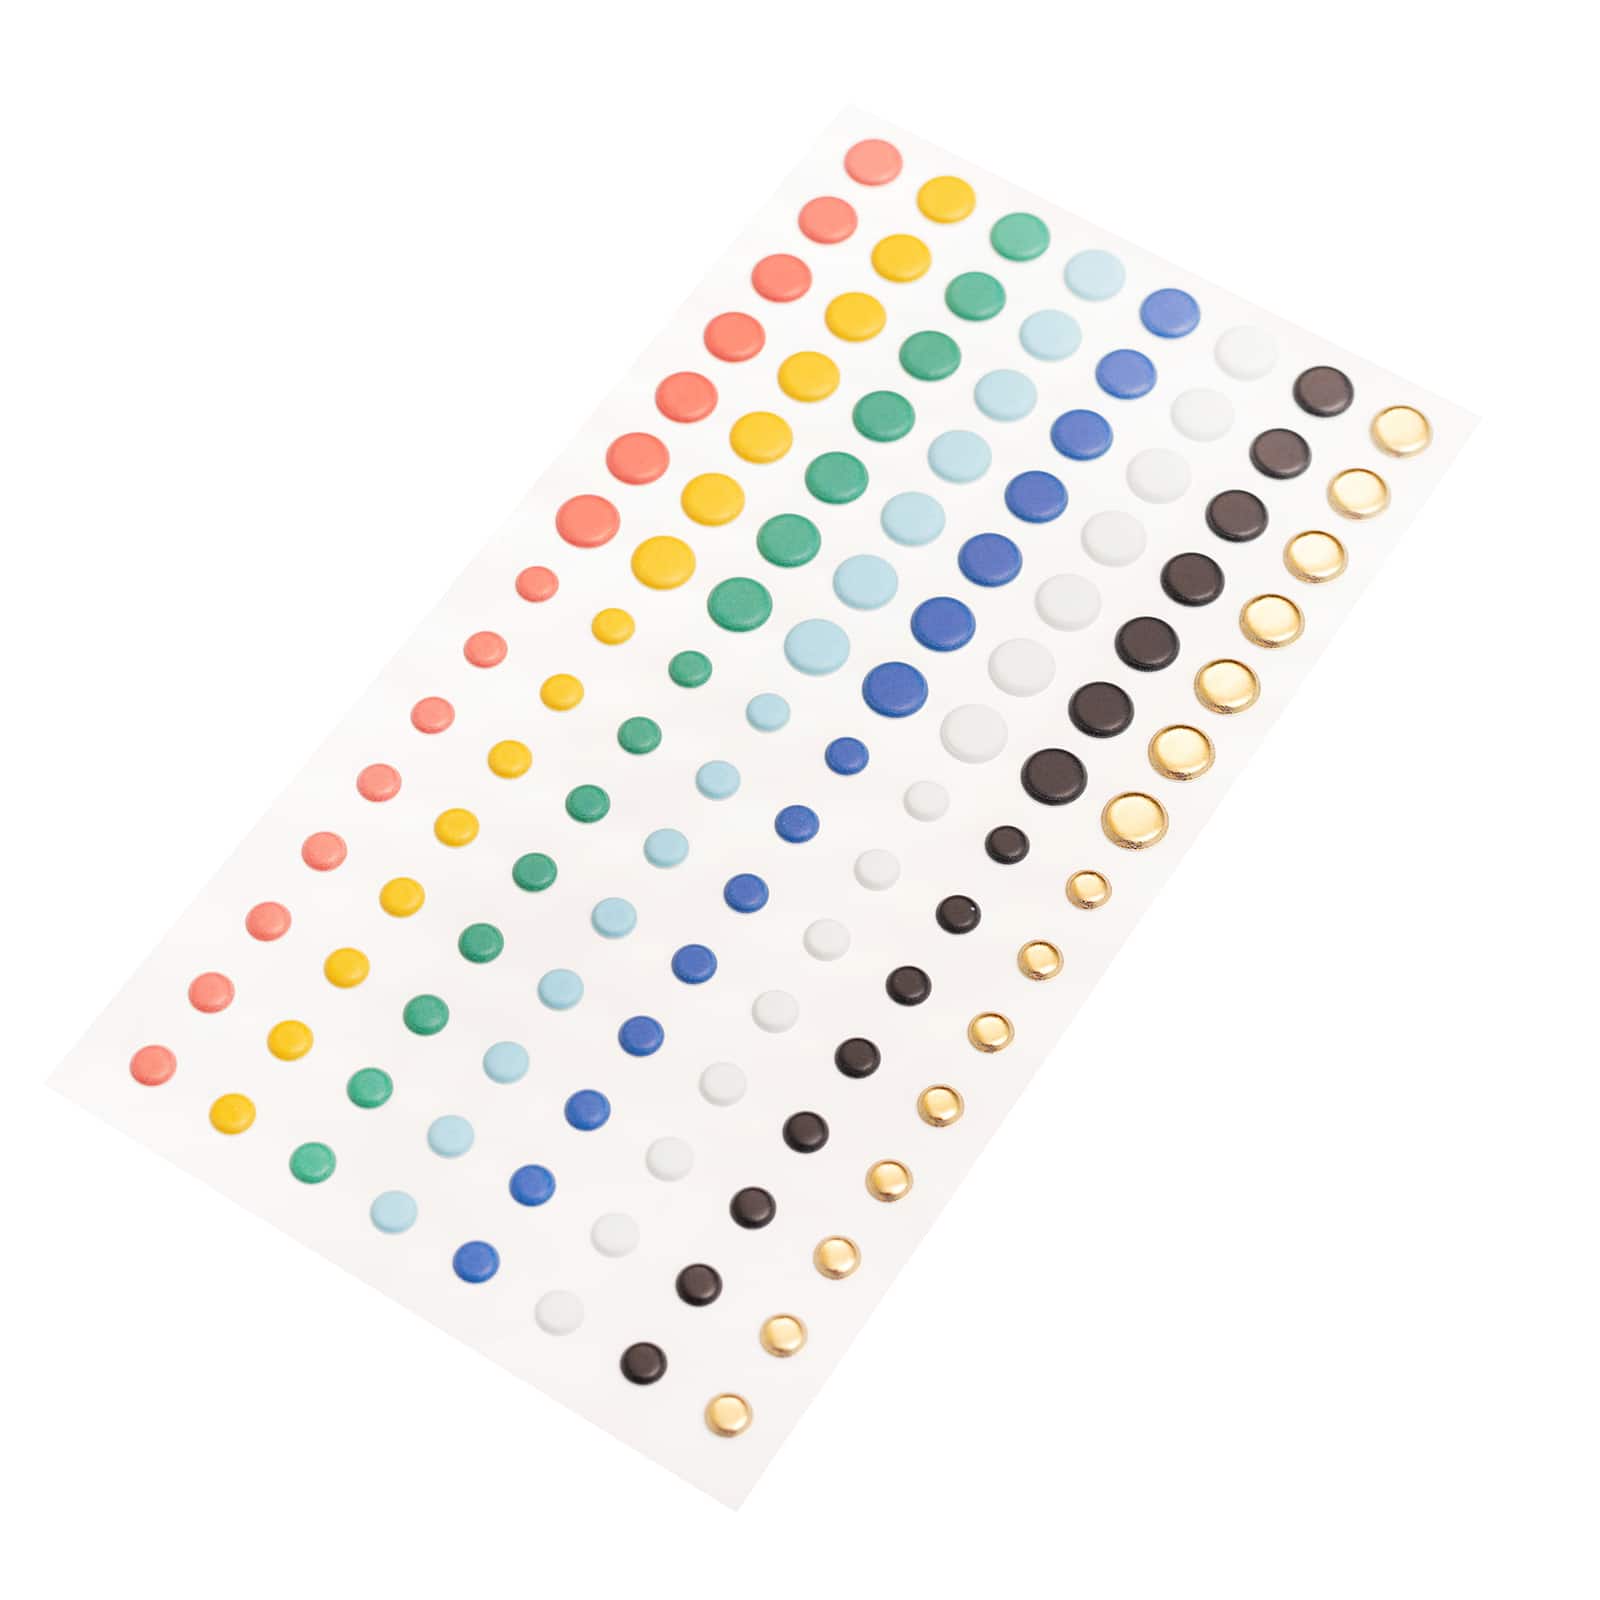 12 Packs: 120 ct. (1,440 total) Multicolor Matte Dot Stickers by  Recollections™